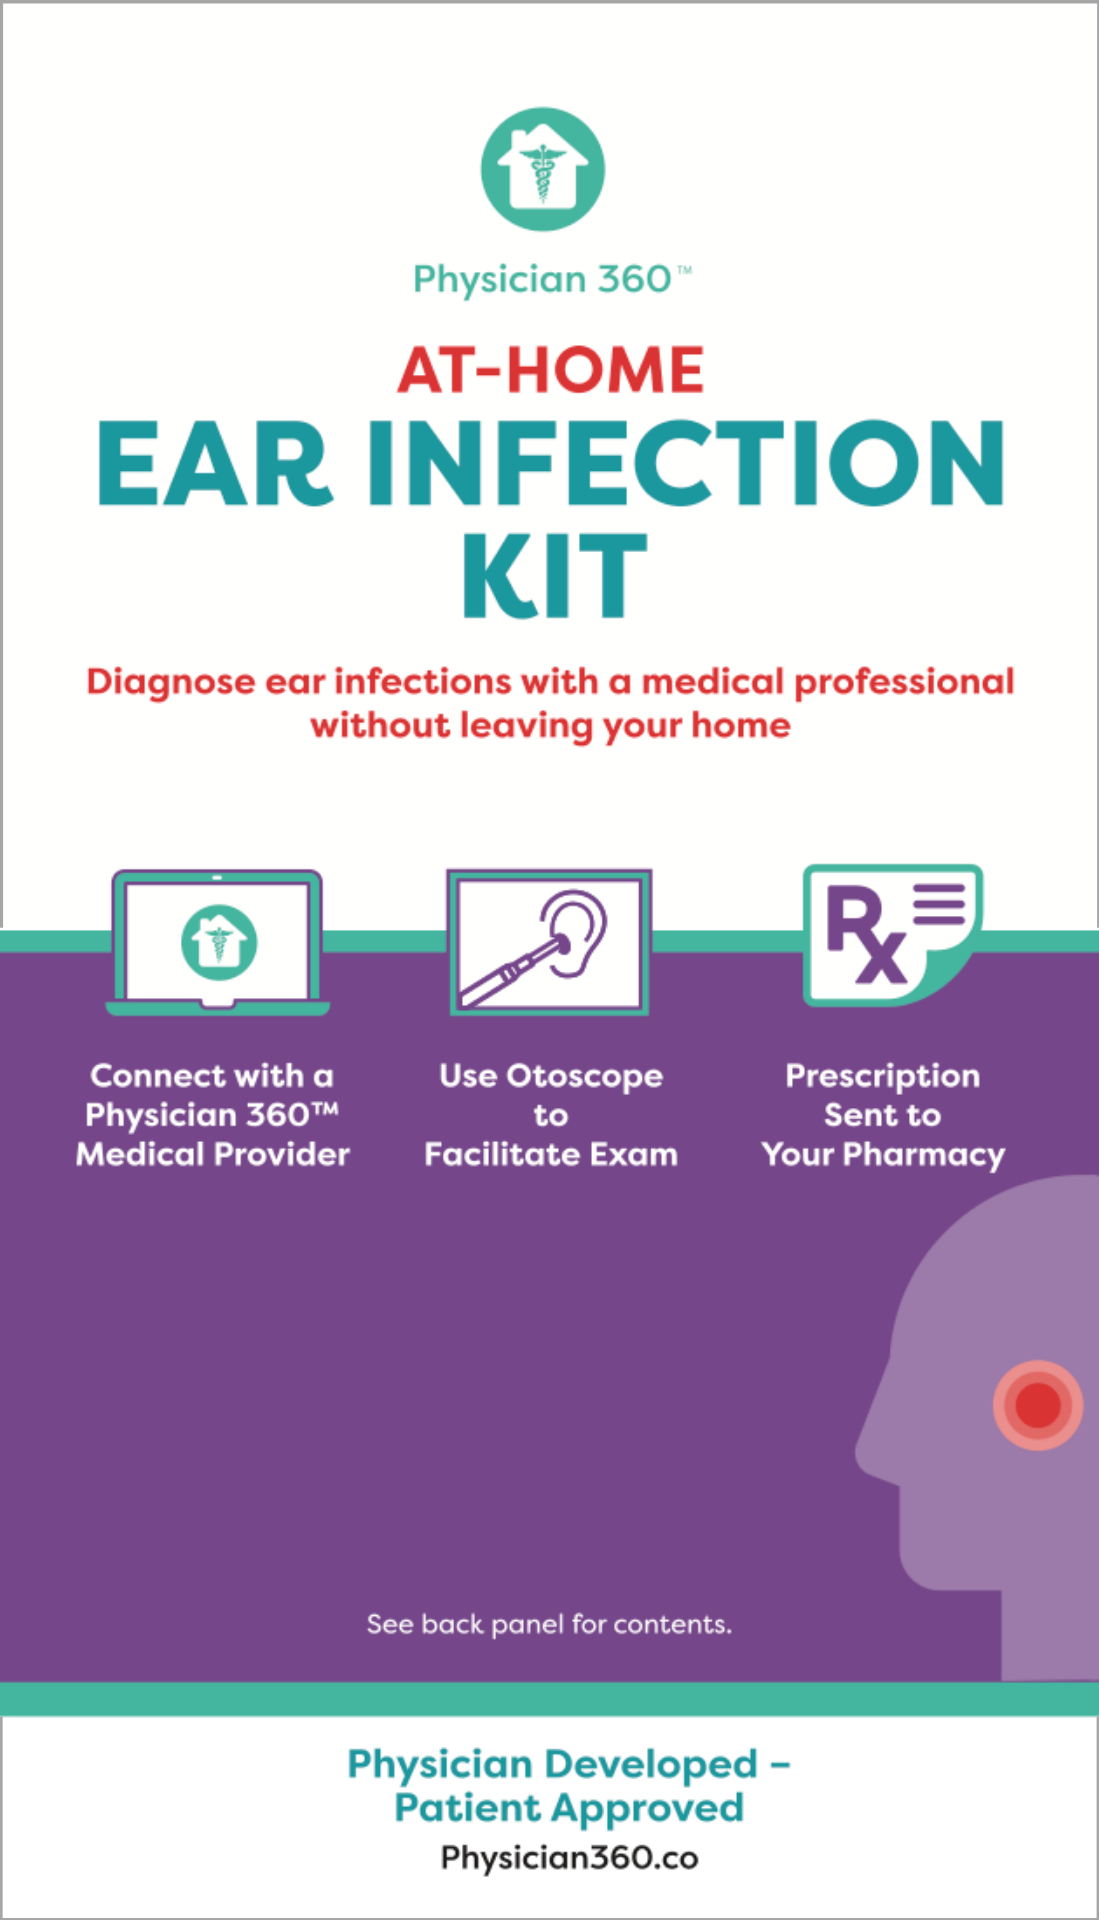 at-home ear infection kit